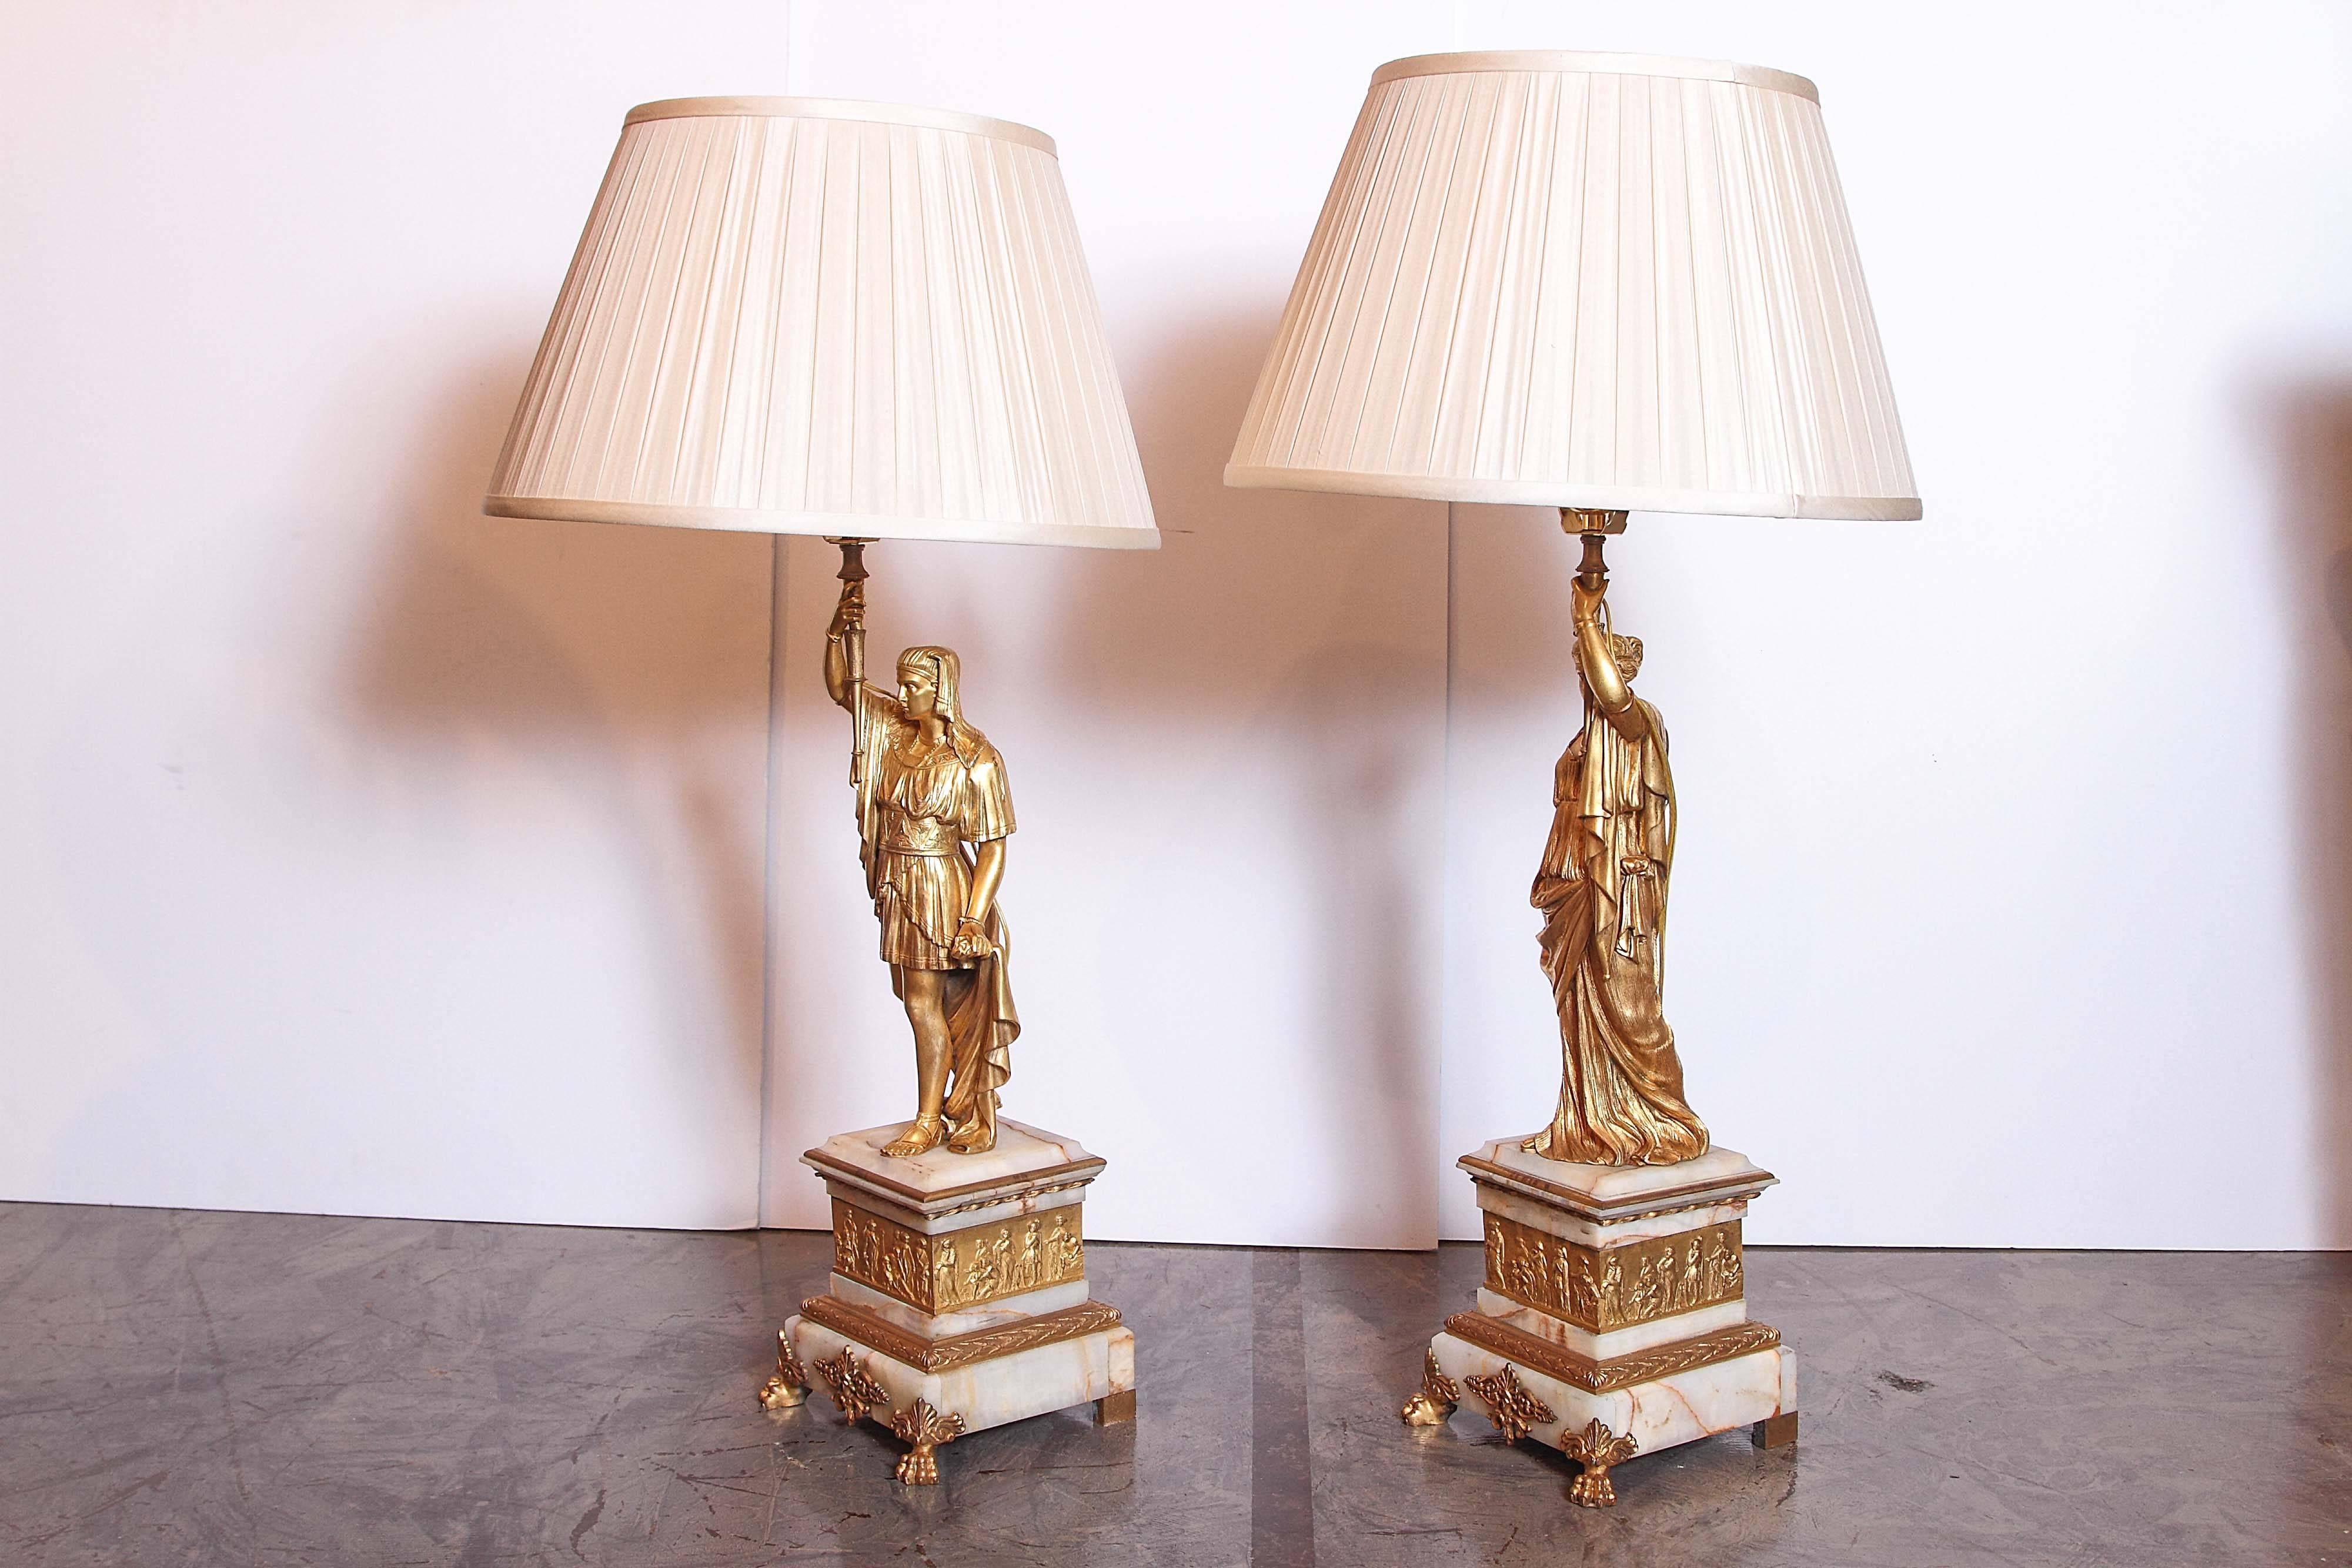 French 19th Century Gilt Bronze and Alabaster Based Empire Classical Figural Lamps